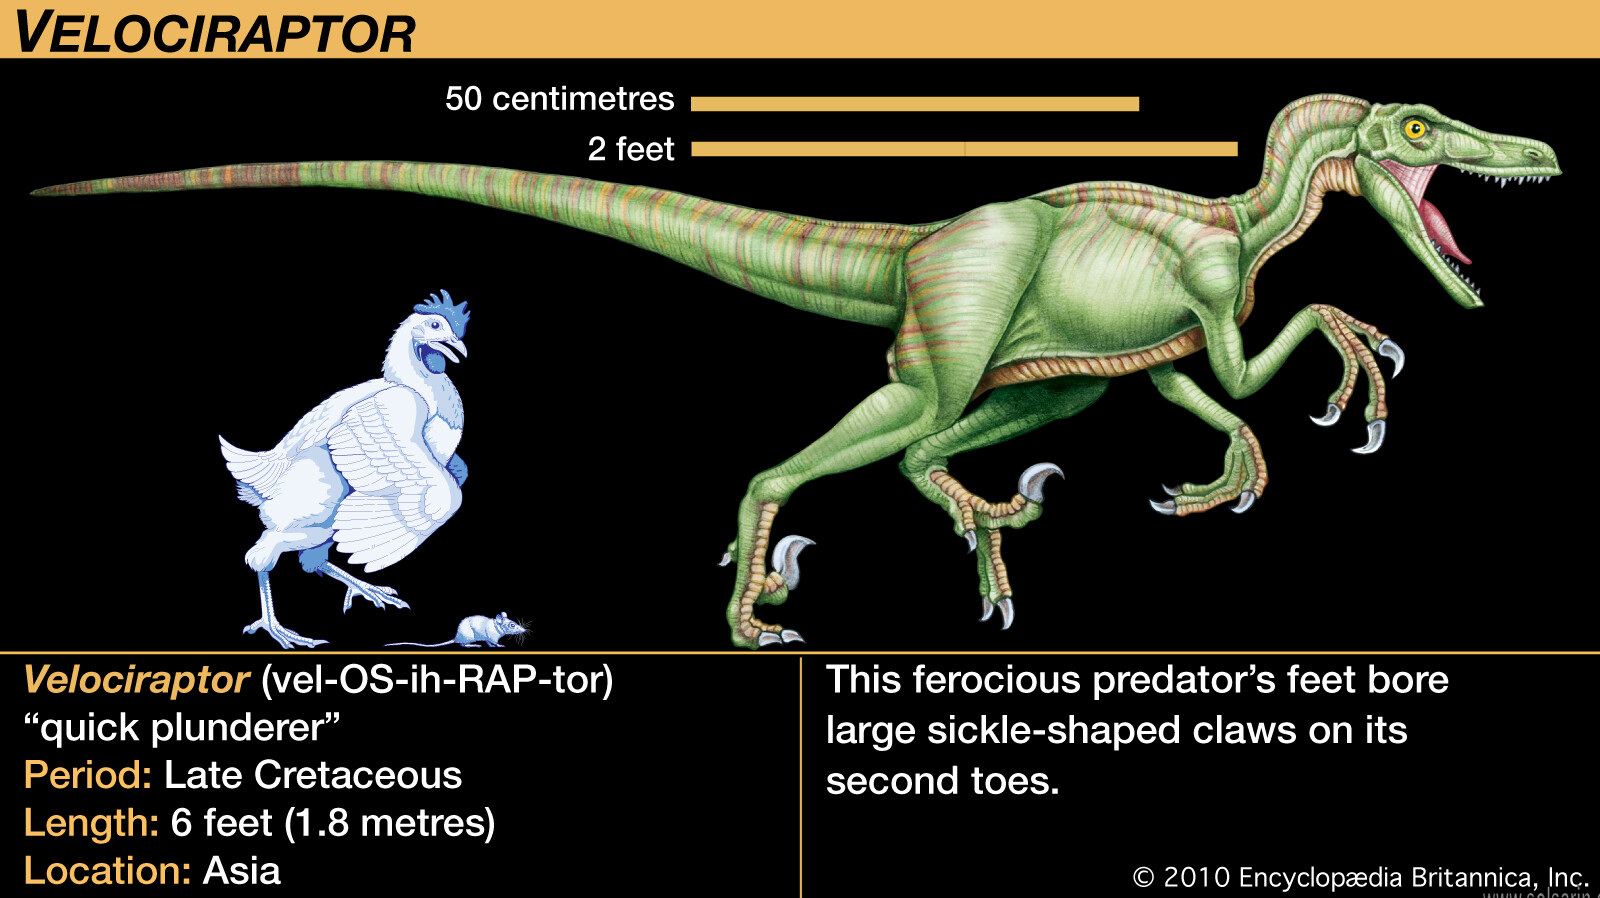 how tall is a velociraptor?